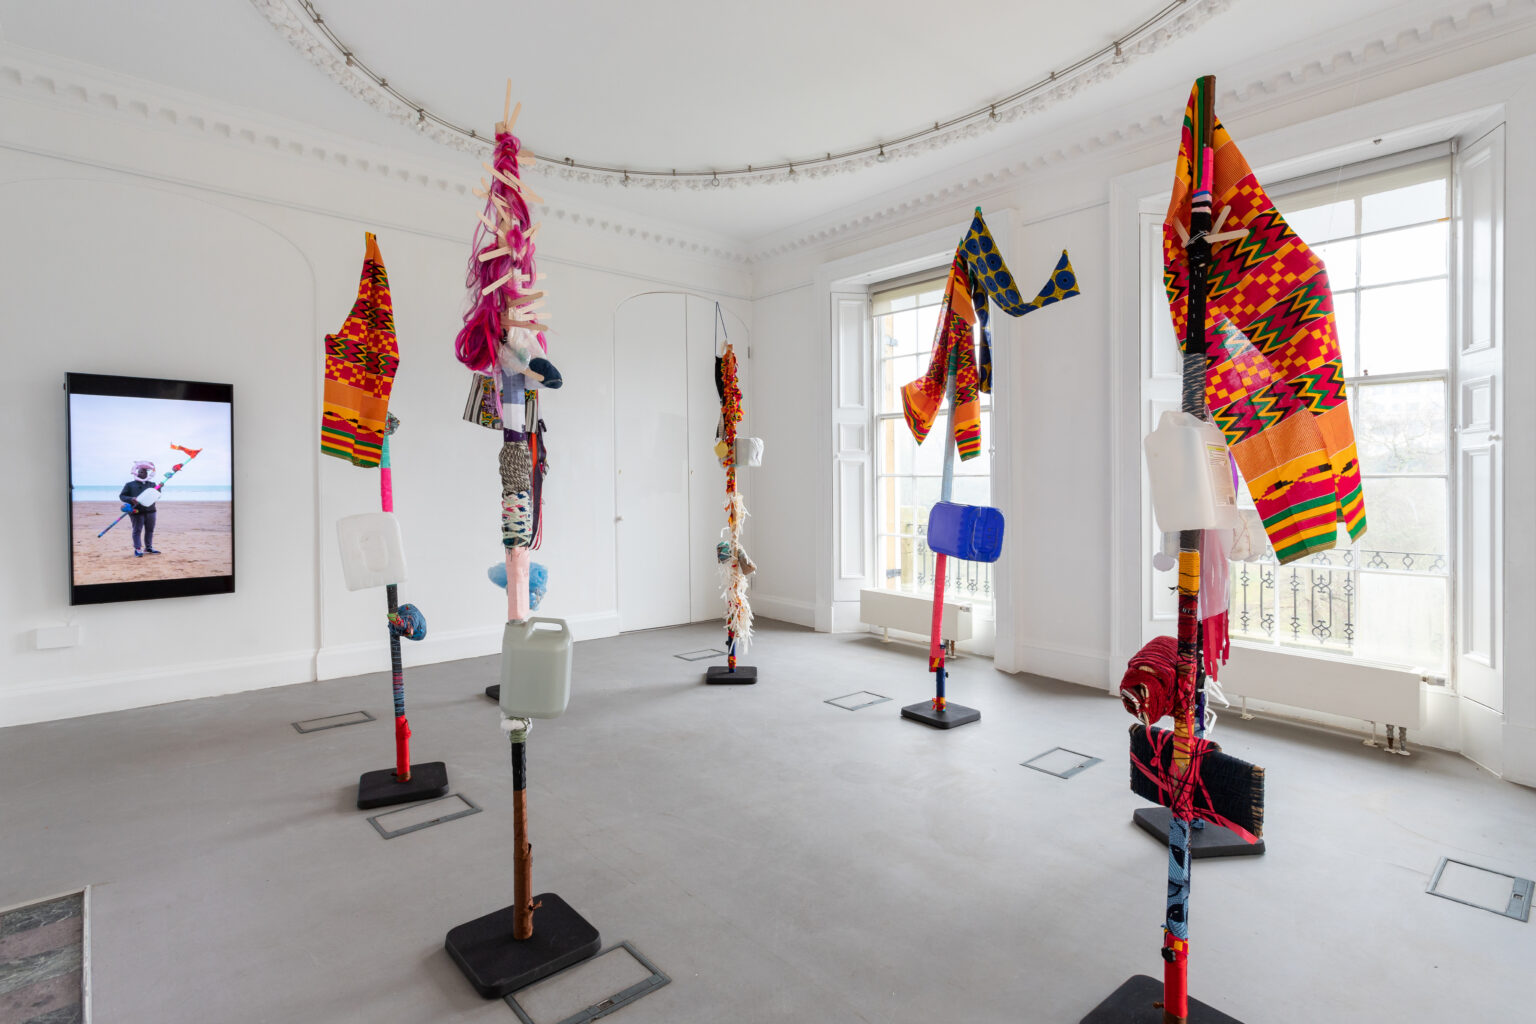 A gallery space with six flags on poles in a circle. The flags are made from fabric, ribbons and recycled materials. Mounted on the wall behind, a video shows a figure holding a flag on a beach.